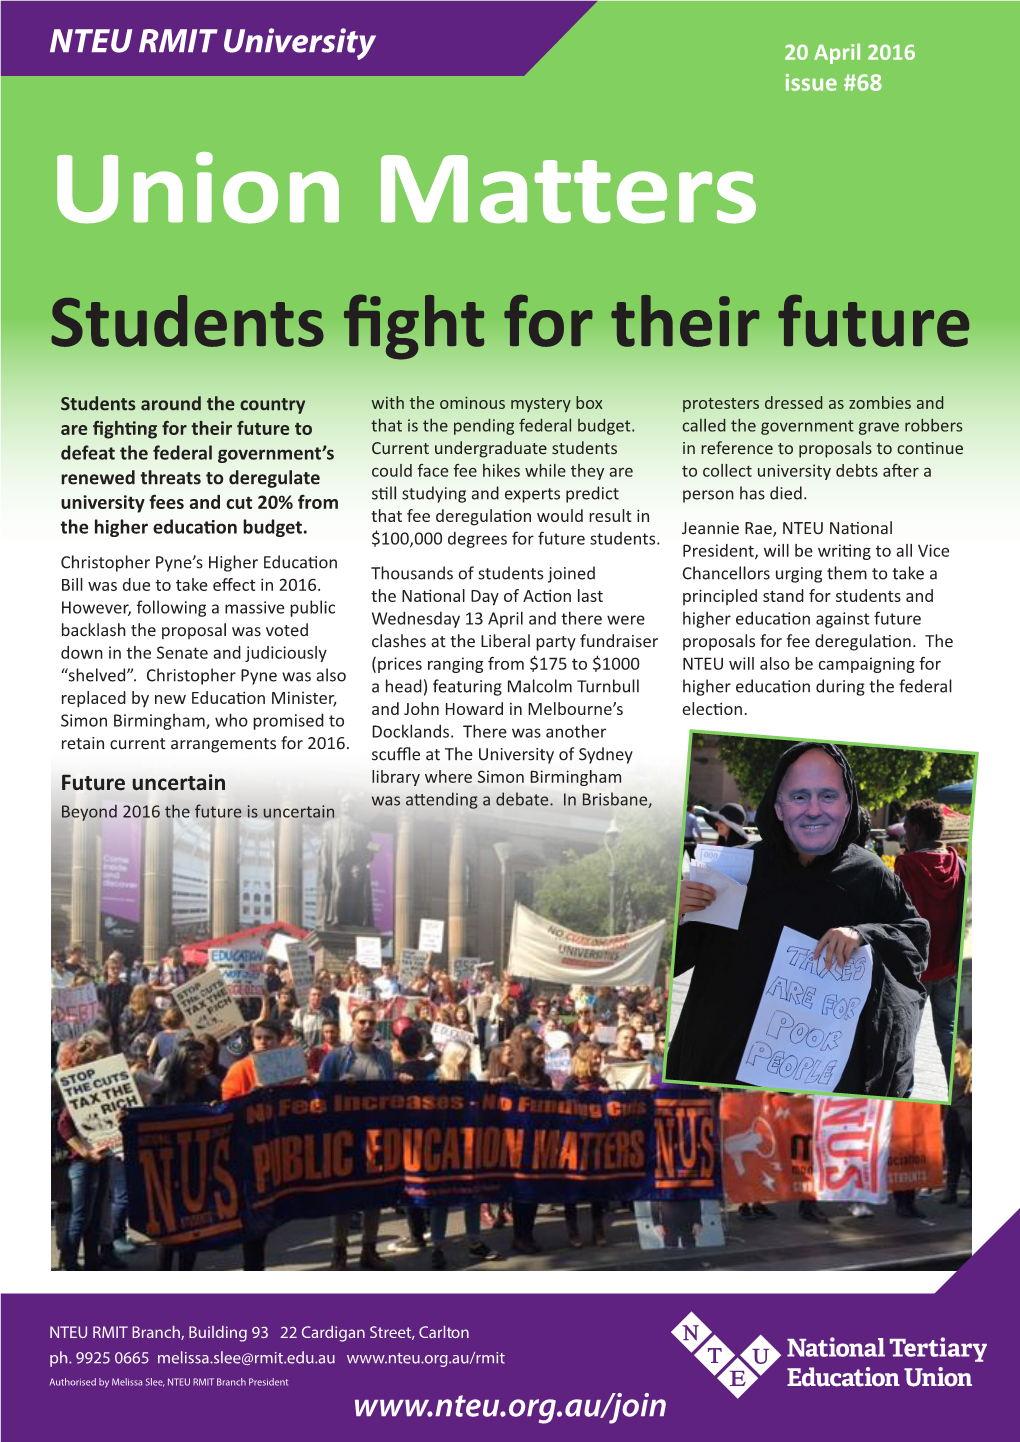 Union Matters Students Fight for Their Future